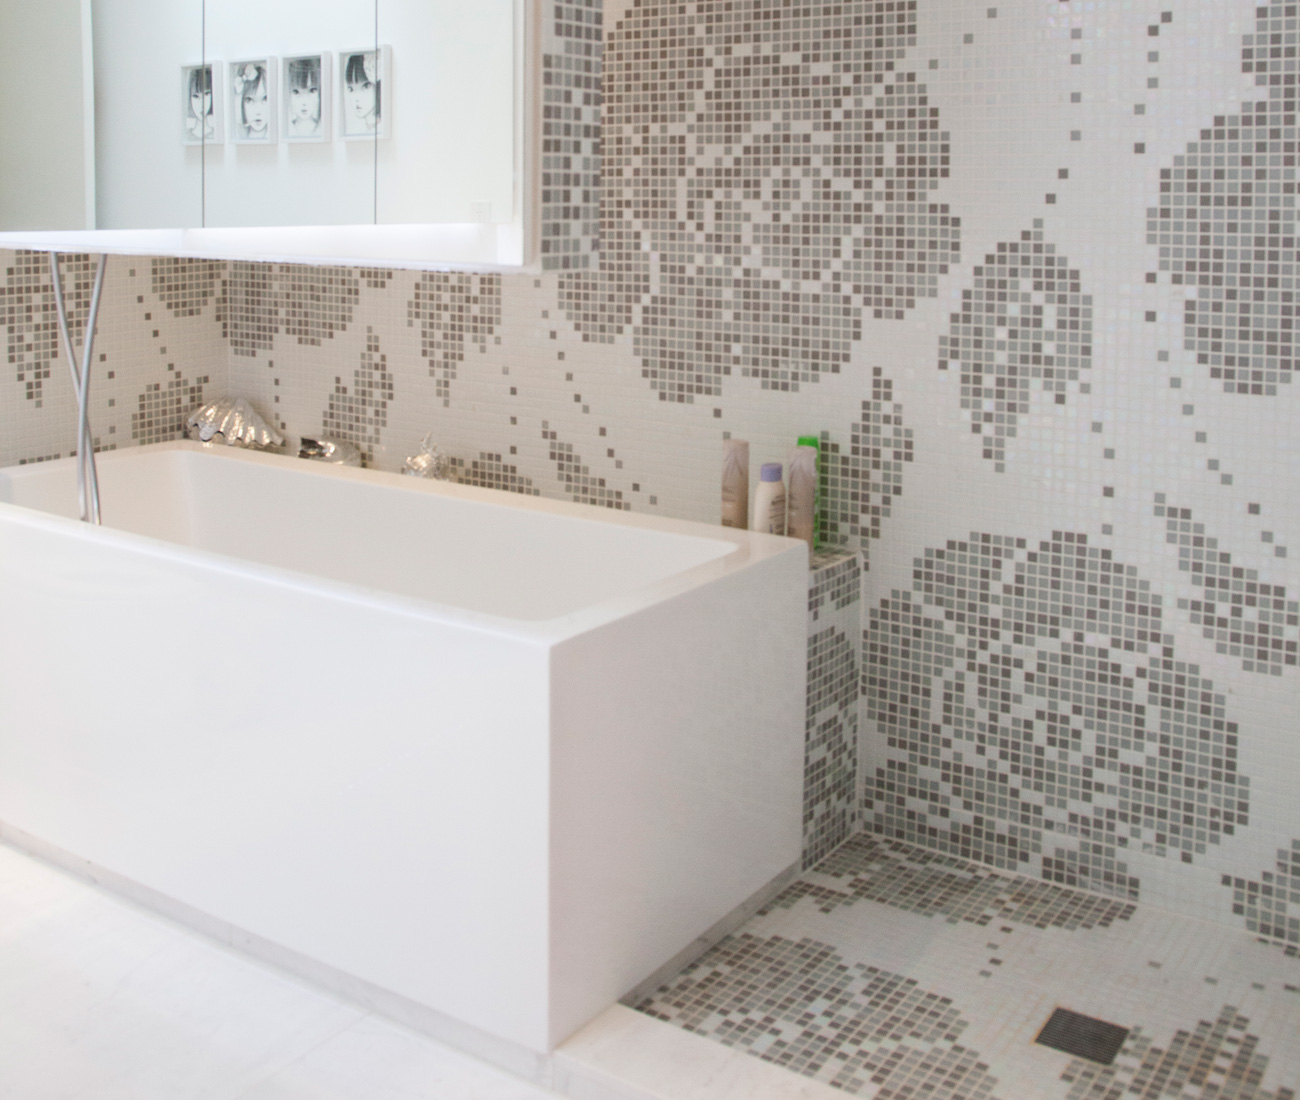 The kids’ bathrooms feature a rose motif Bisazza mosaic from Stone Tile. Tub by Wetstyle from Roman Bath Centre.